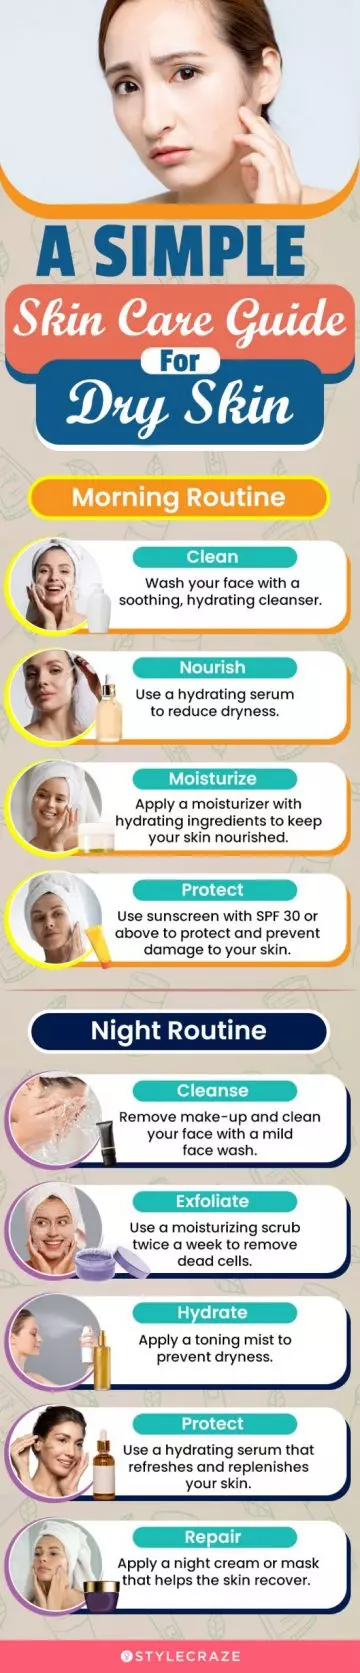 a simple skincare guide for dry skin (infographic)